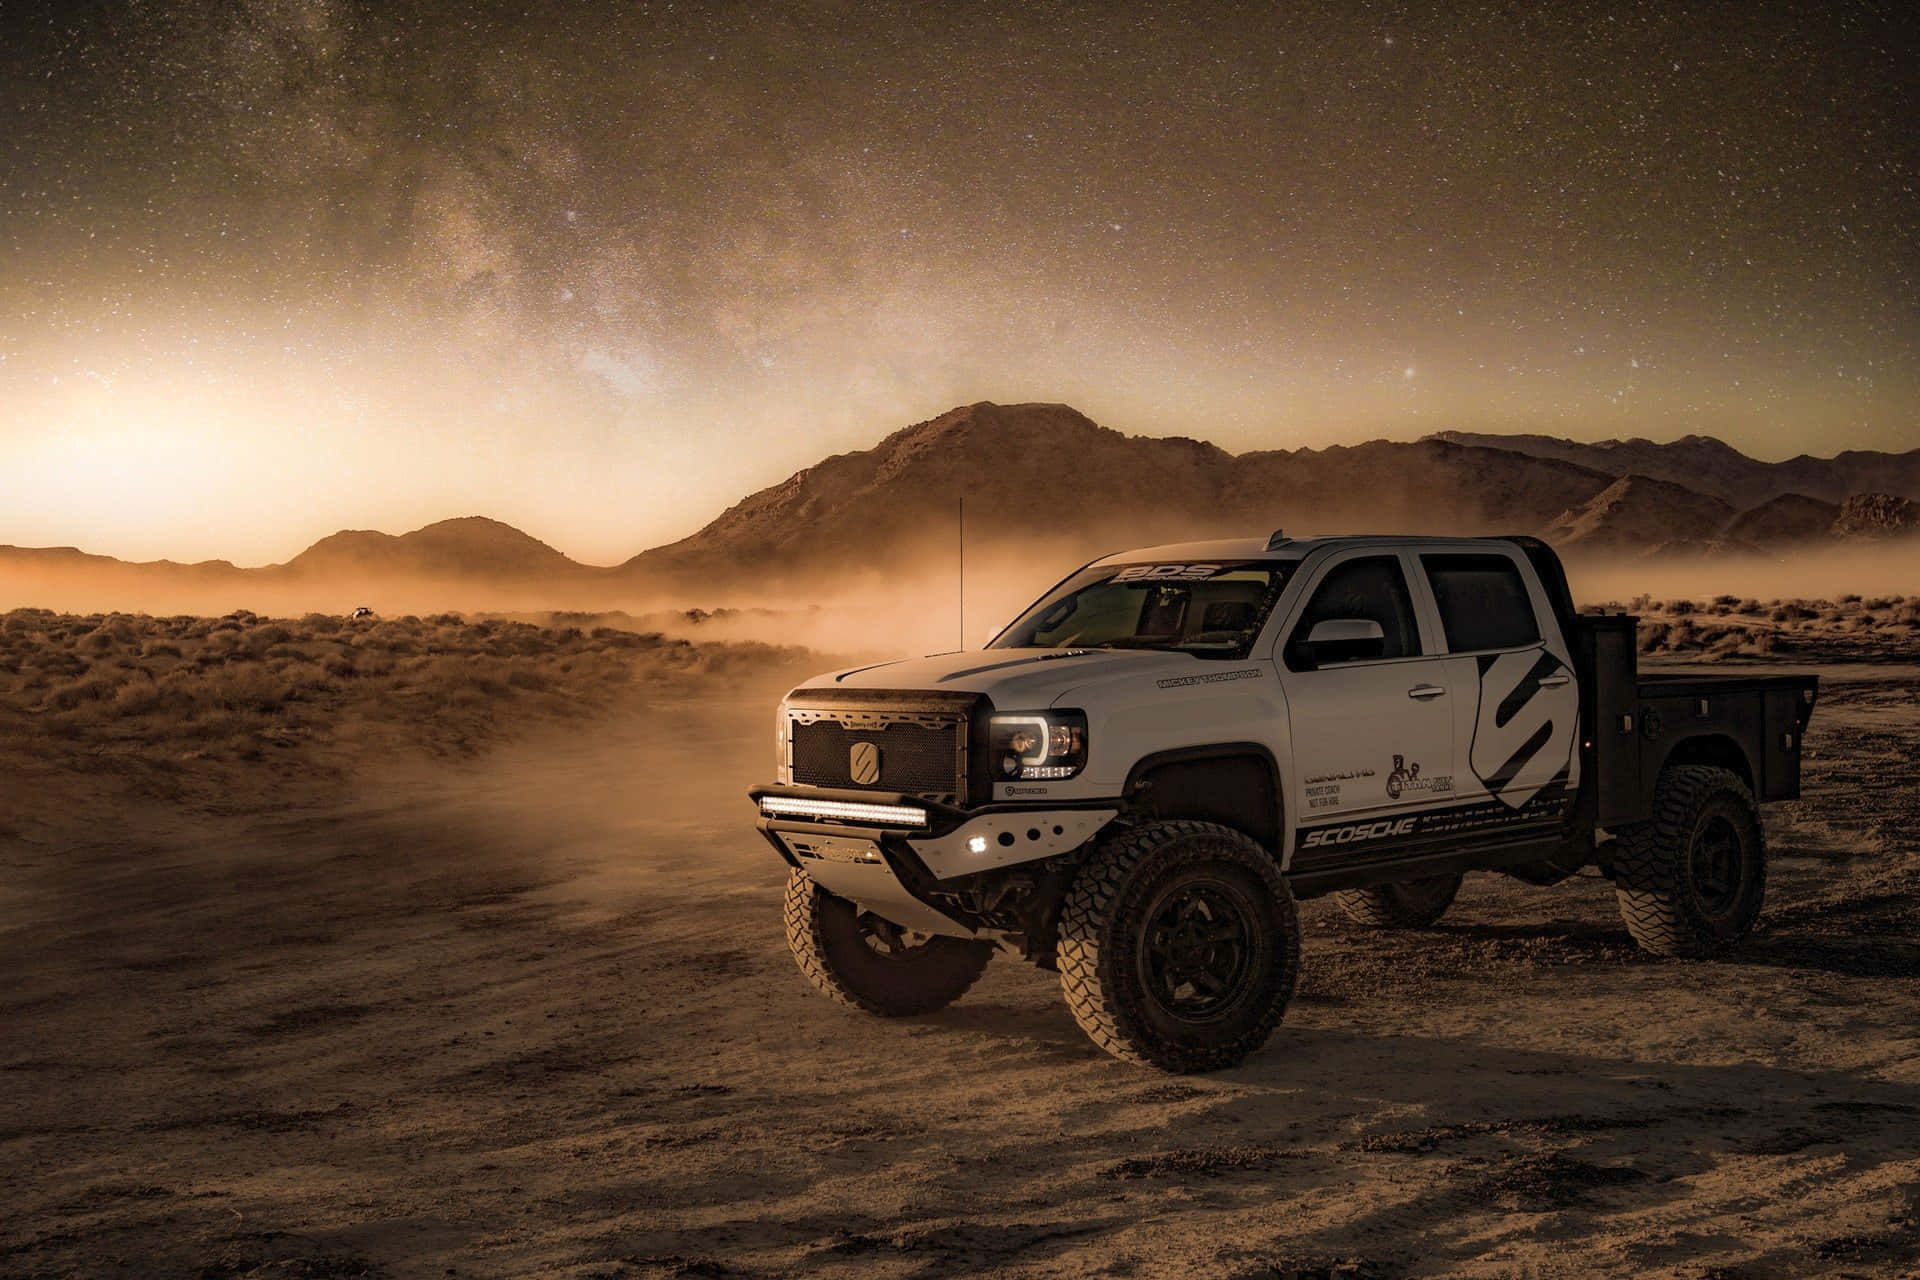 A White Truck In The Desert With A Starry Sky